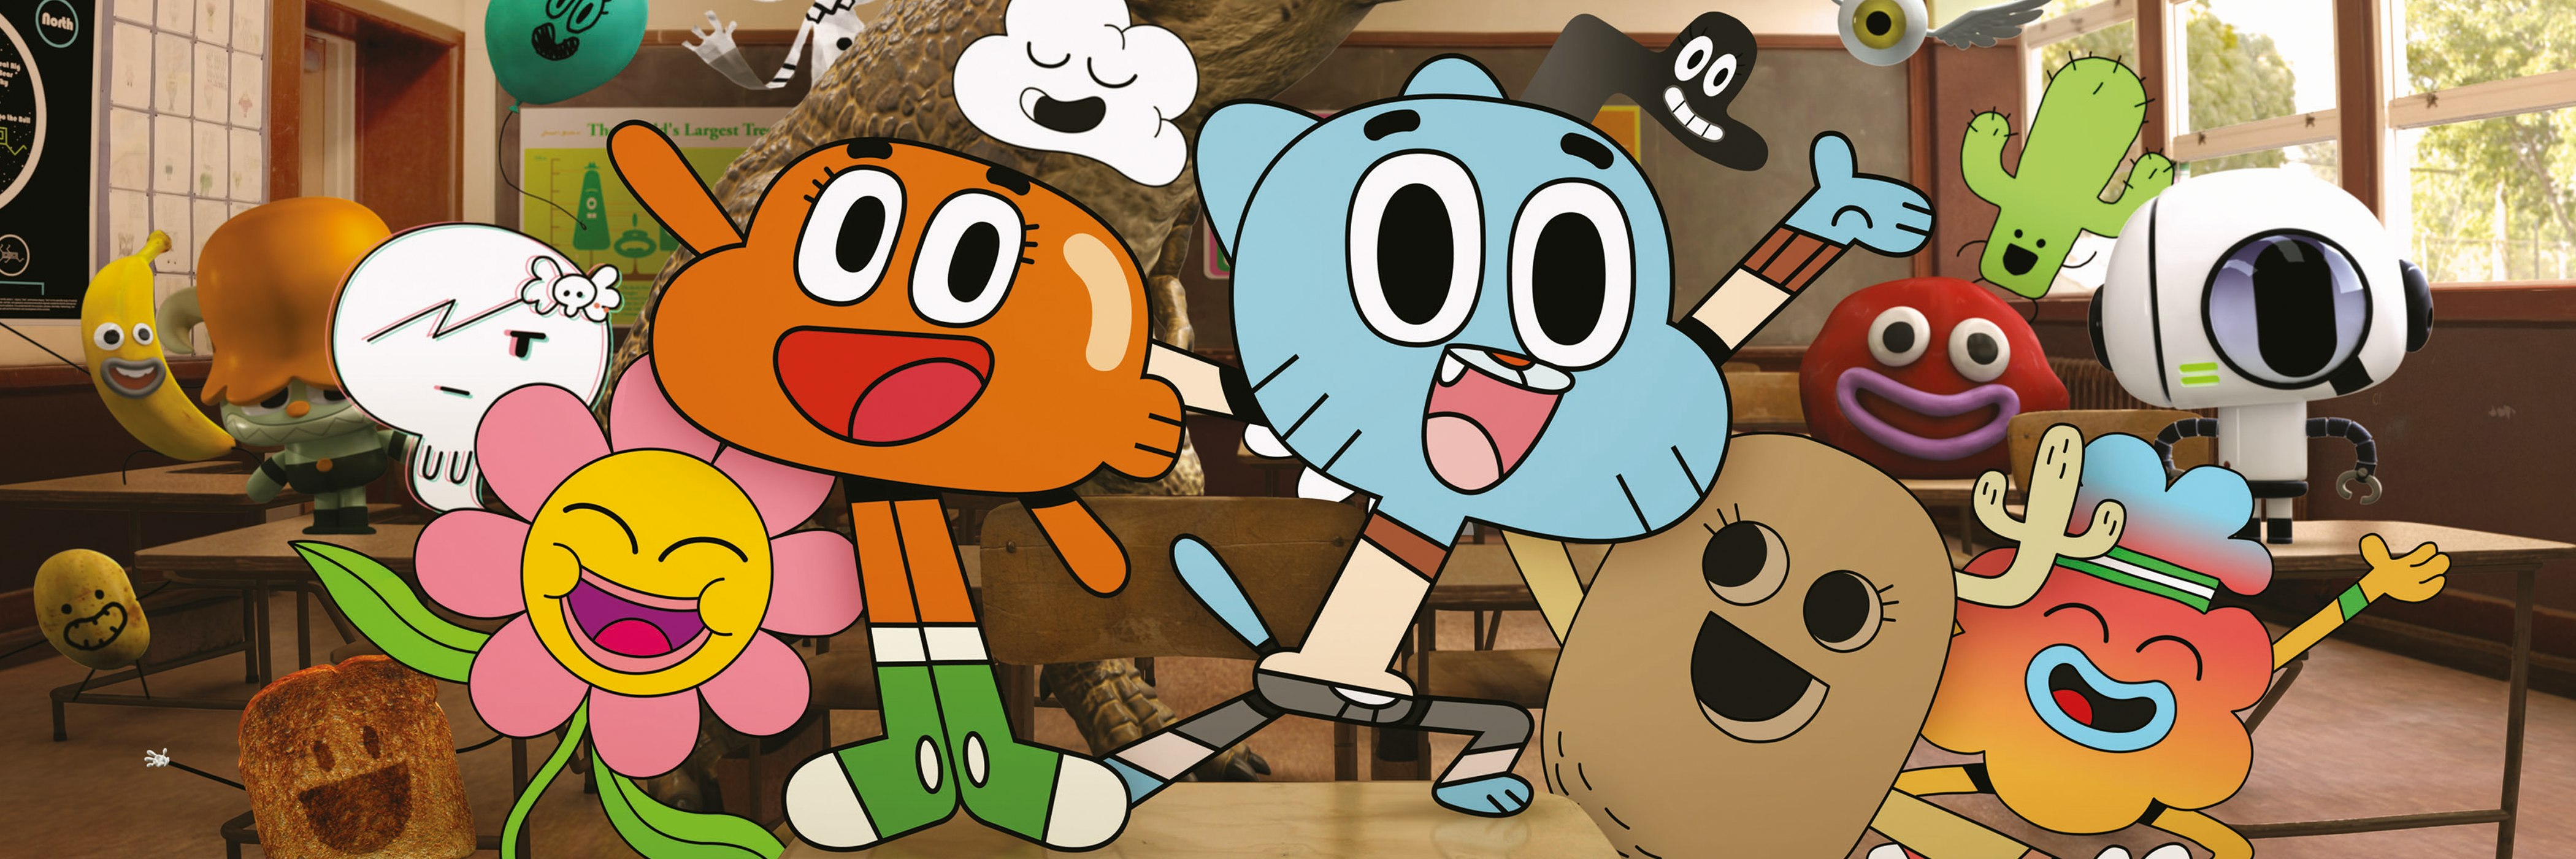 Watch The Amazing World of Gumball · Season 4 Episode 23 · The Advice Full  Episode Online - Plex